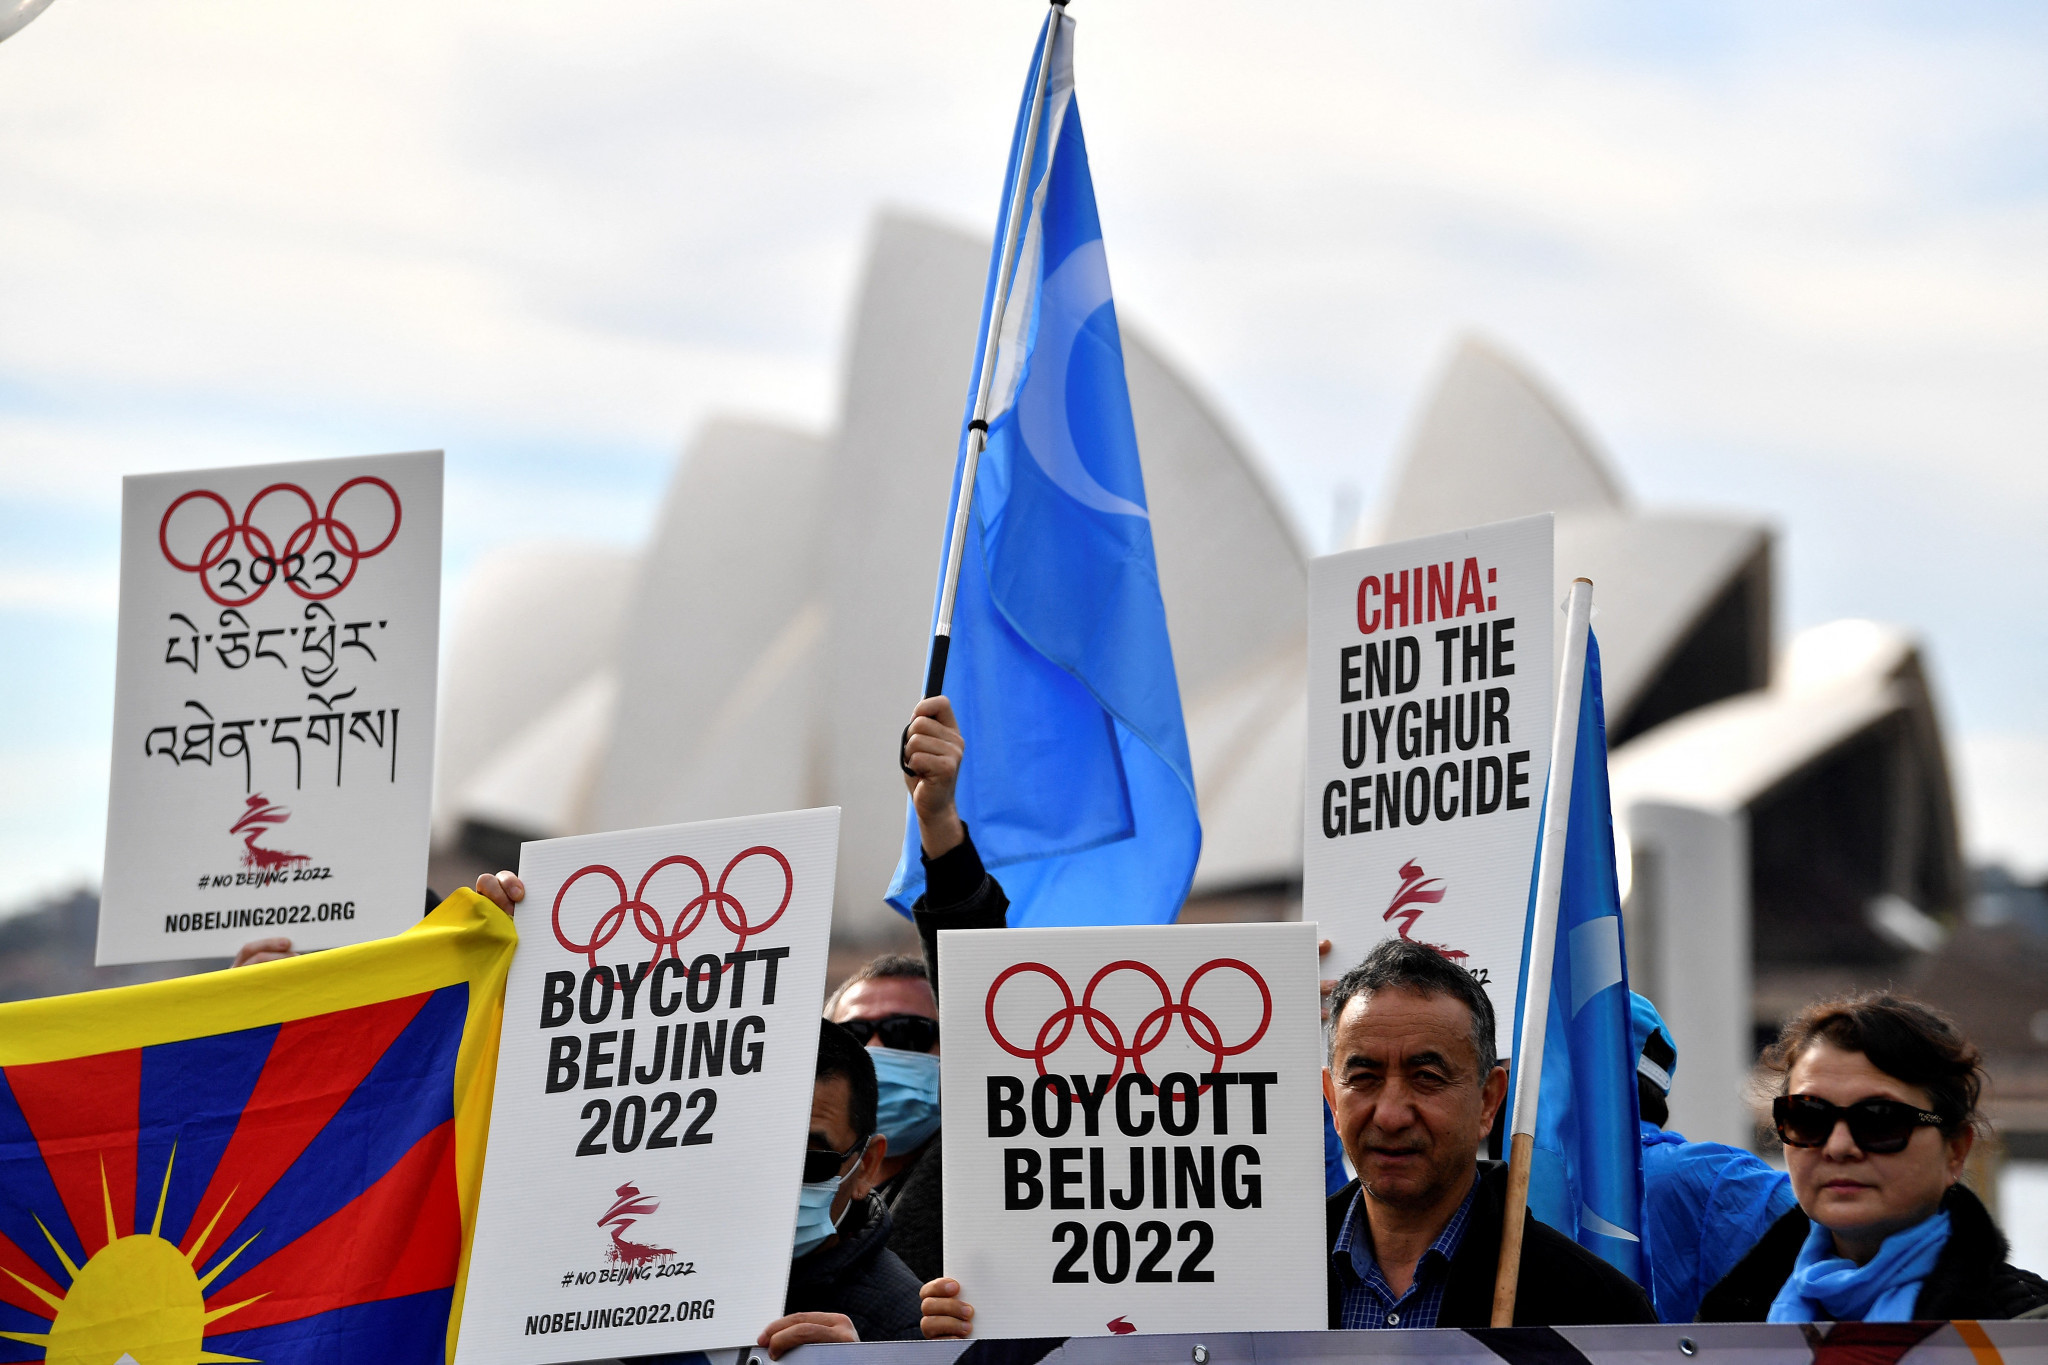 China's record on human rights has come under scrutiny in the build-up to the Beijing 2022 Winter Olympics ©Getty Images